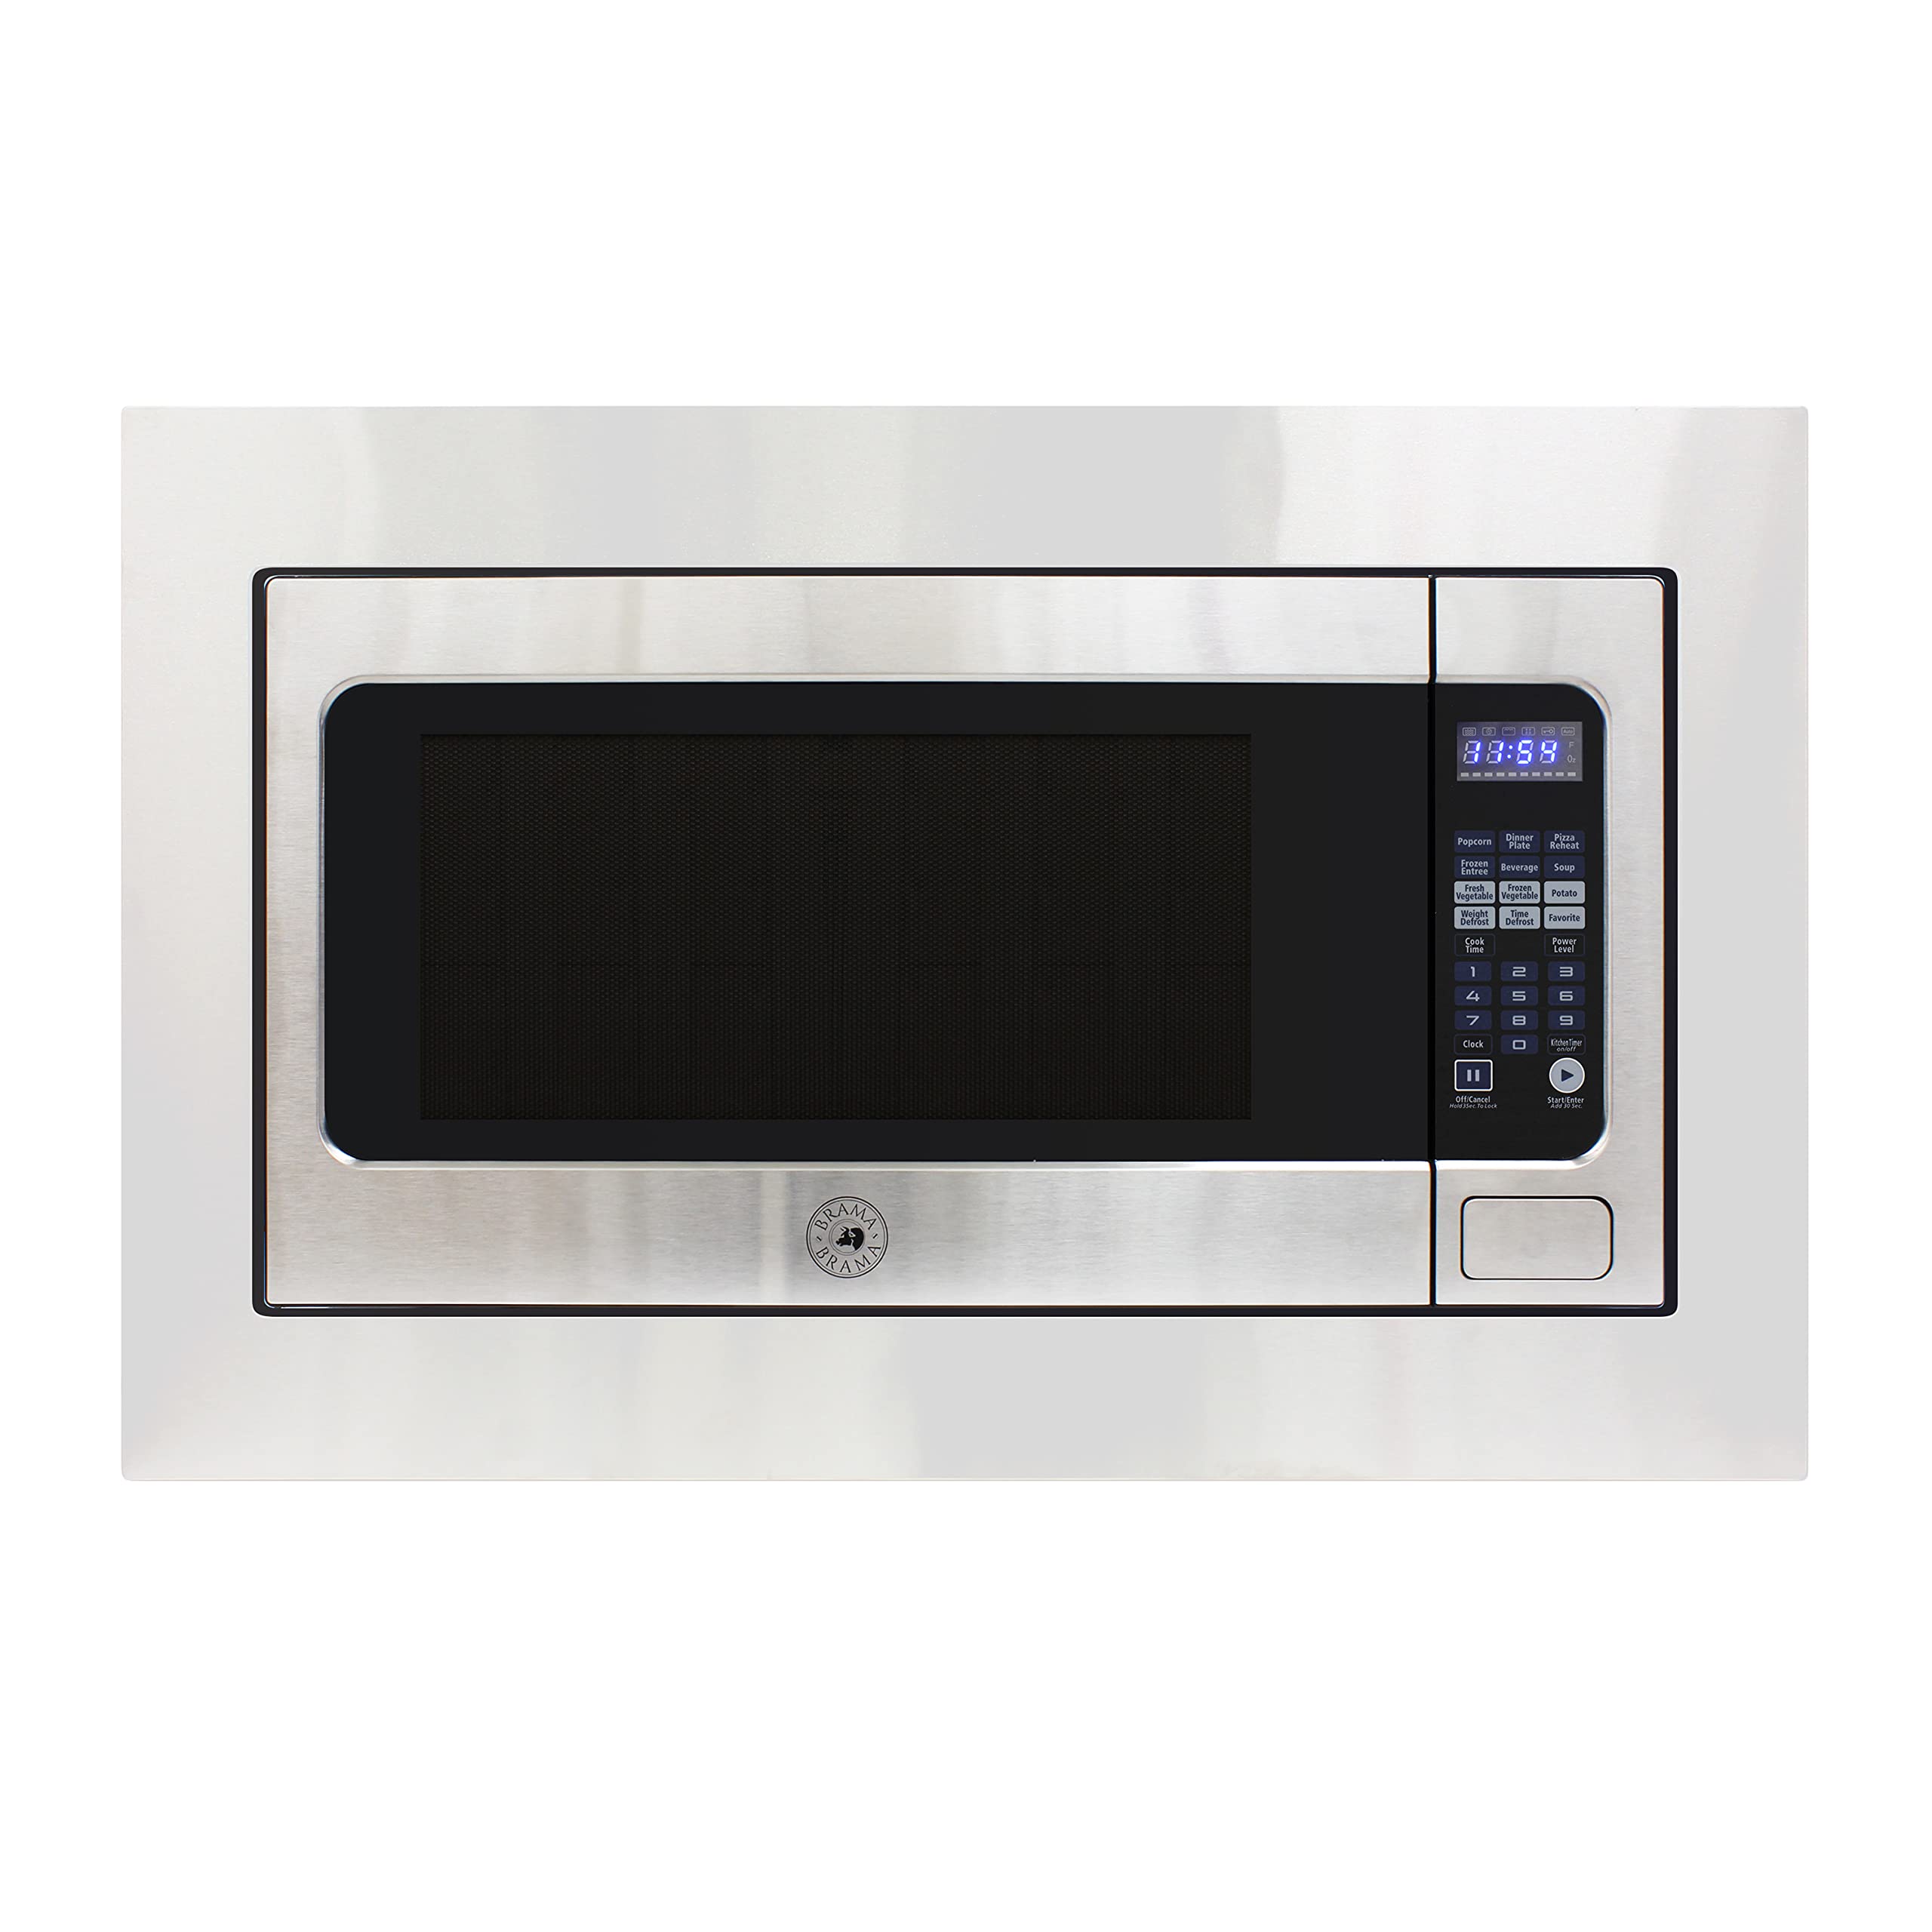 Brama Microwave Oven Built-In 1200-Watts with 10 Power Levels Pre-Set cooking Settings and Express cook, Sensor and Speed cookin